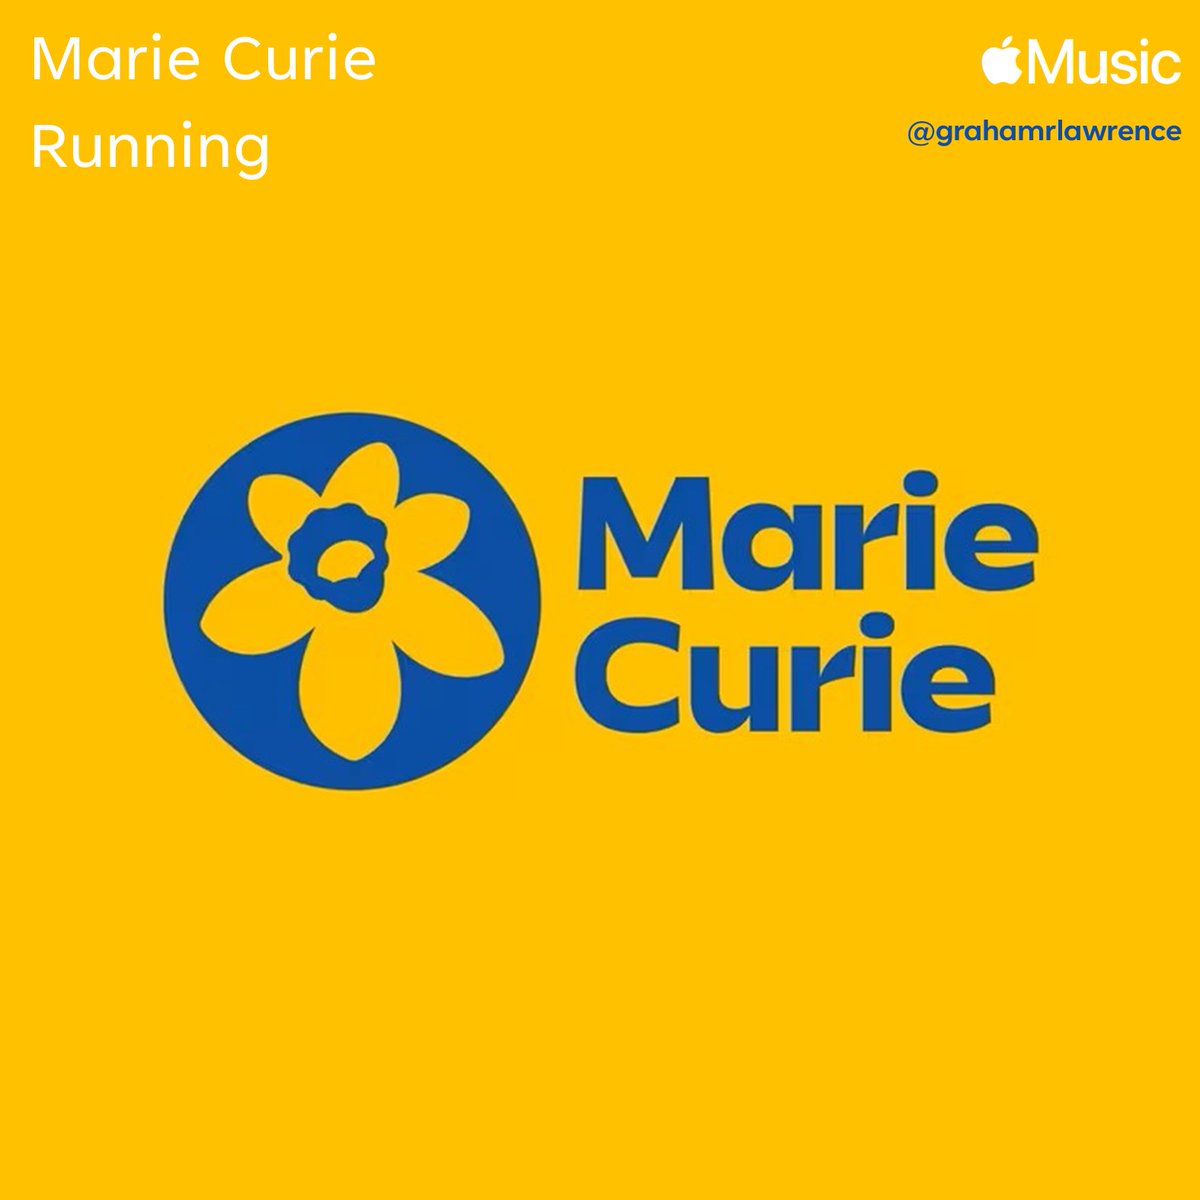 Running Playlist | Adding a song a day in preparation for Running 80K in May 2024 for Marie Curie: music.apple.com/gb/playlist/ma… 

🎵Tambourine🎵 Eve

Fundraiser: bio.link/grahamrlawrence

#MarieCurie #Fundraiser #Running #GrahamsRunForMarieCurie #Playlist #RunningPlaylist #Eve